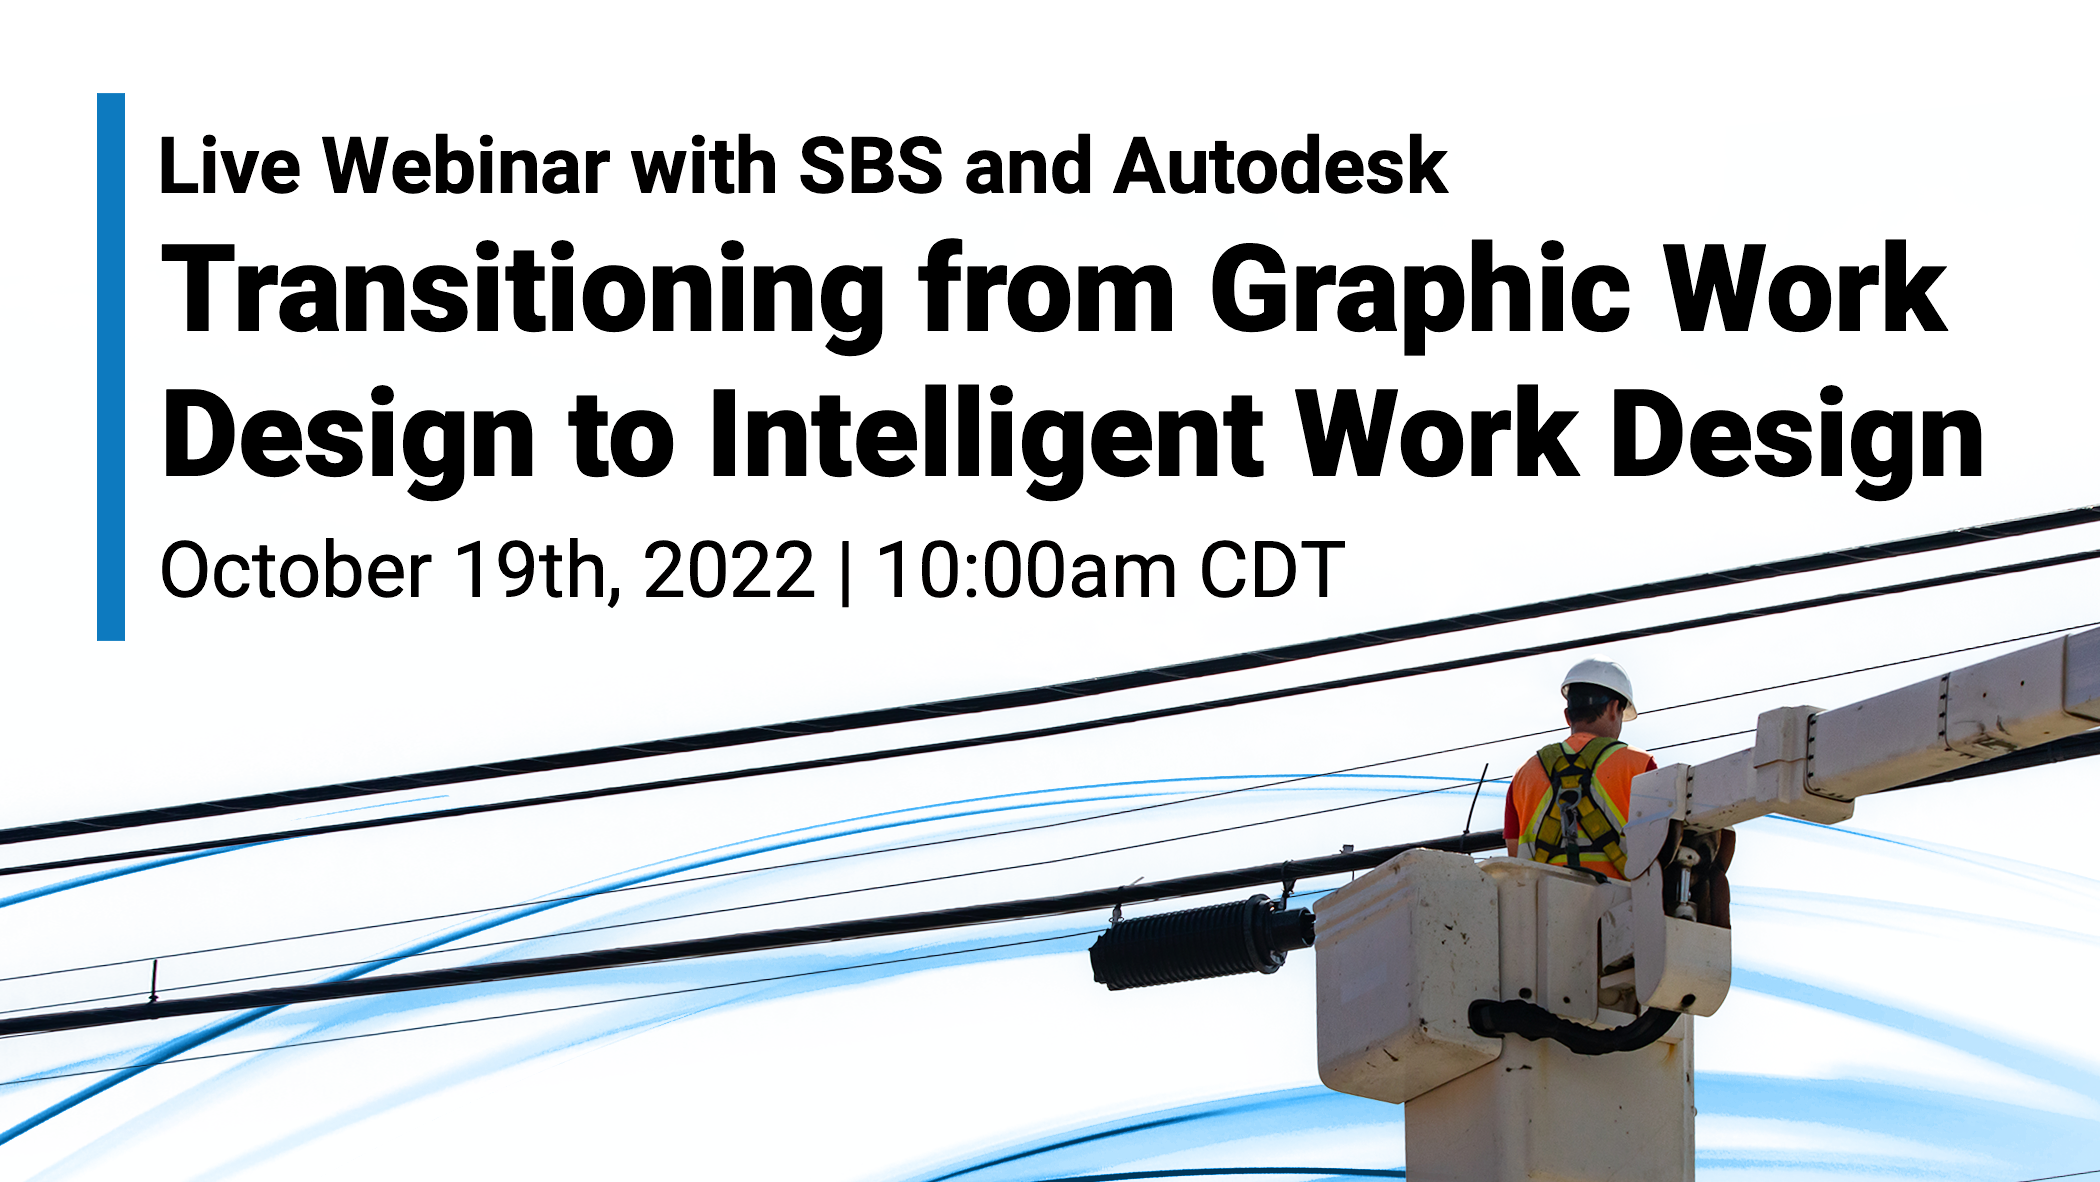 Live Webinar with SBS And Autodesk